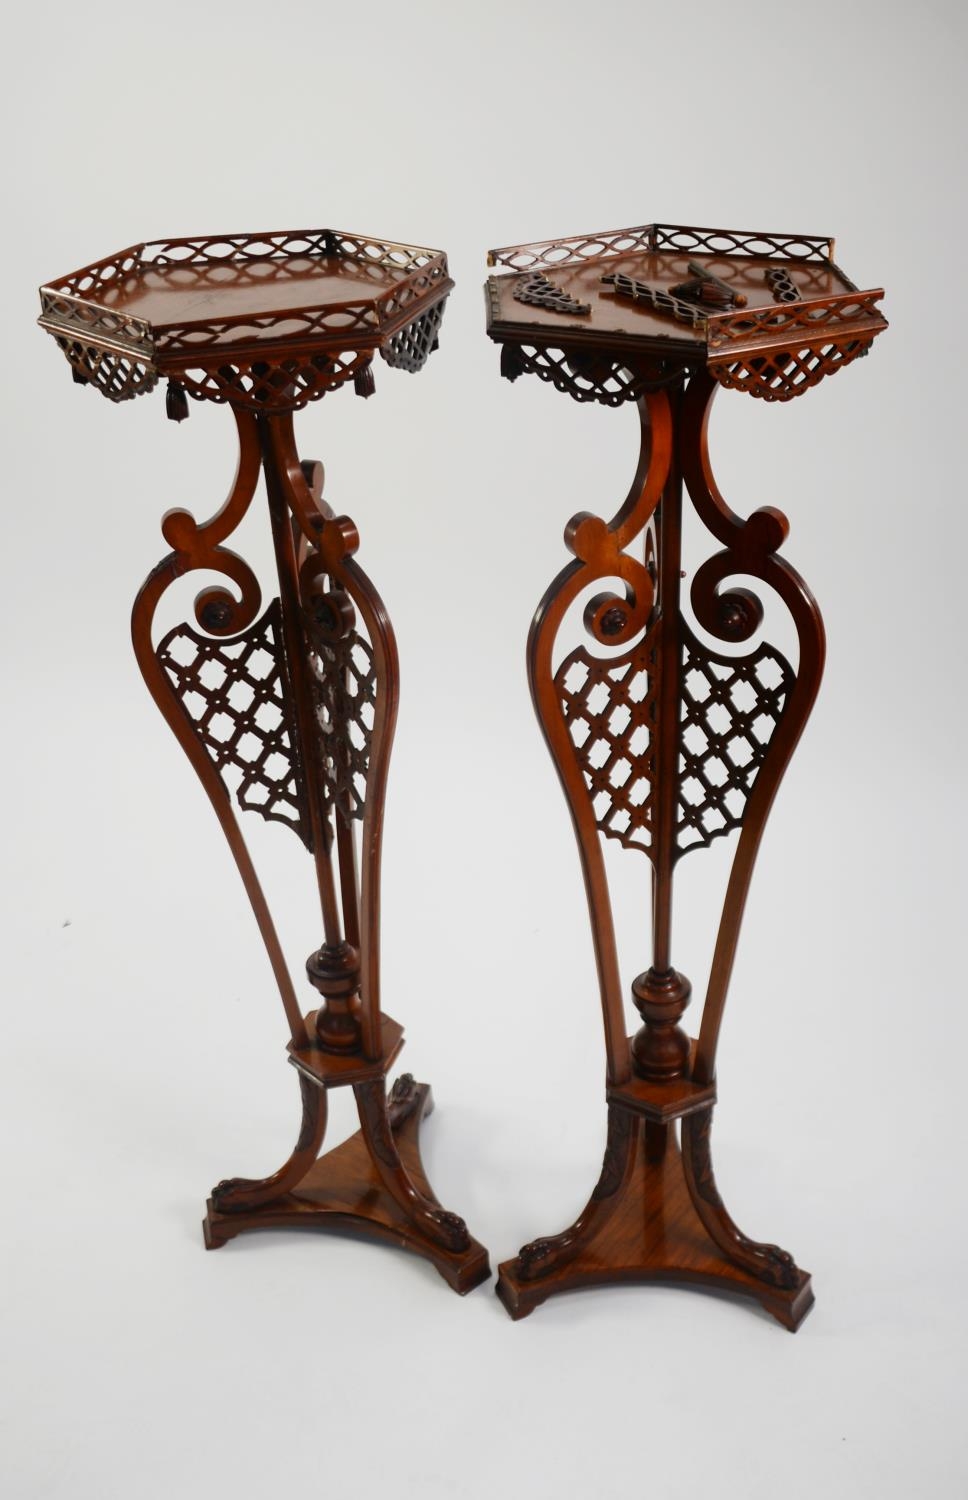 PAIR OF CHIPPENDALE STYLE FRET CARVED MAHOGANY TORCHÈRE STANDS with hexagonal gallery tops, three